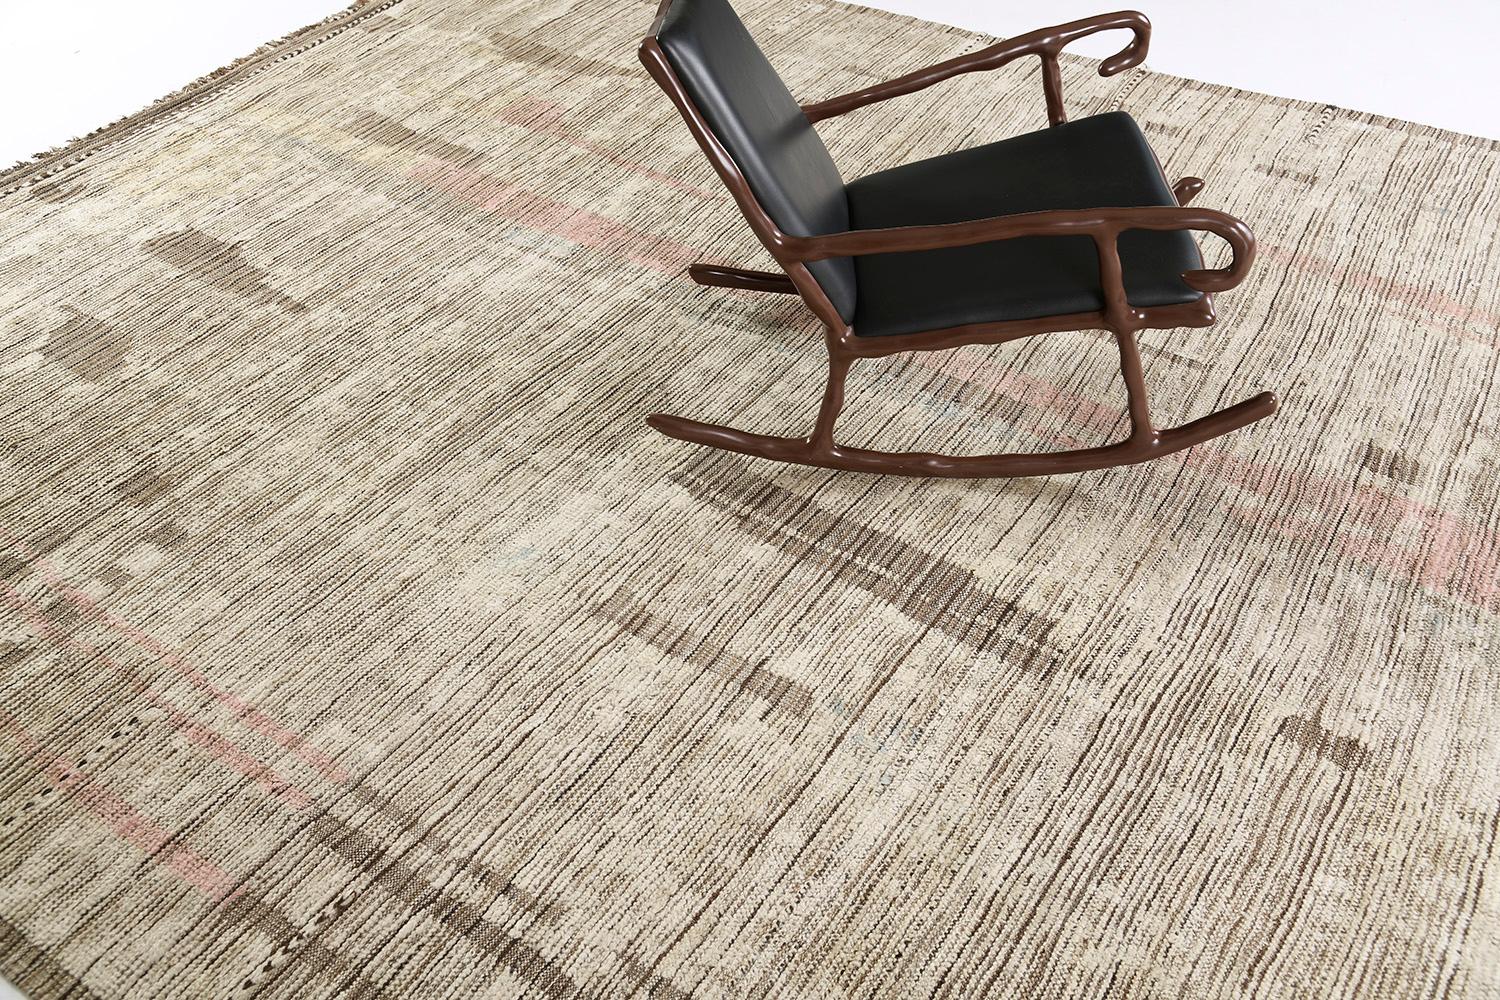 Nakhla is a natural earth-toned rug and a modern interpretation of the Moroccan world. These rugs' irregular patches of brown, ivory, and salmon red resemble the fibers of nature and their ability to be used for crafts such as cords and basketry.